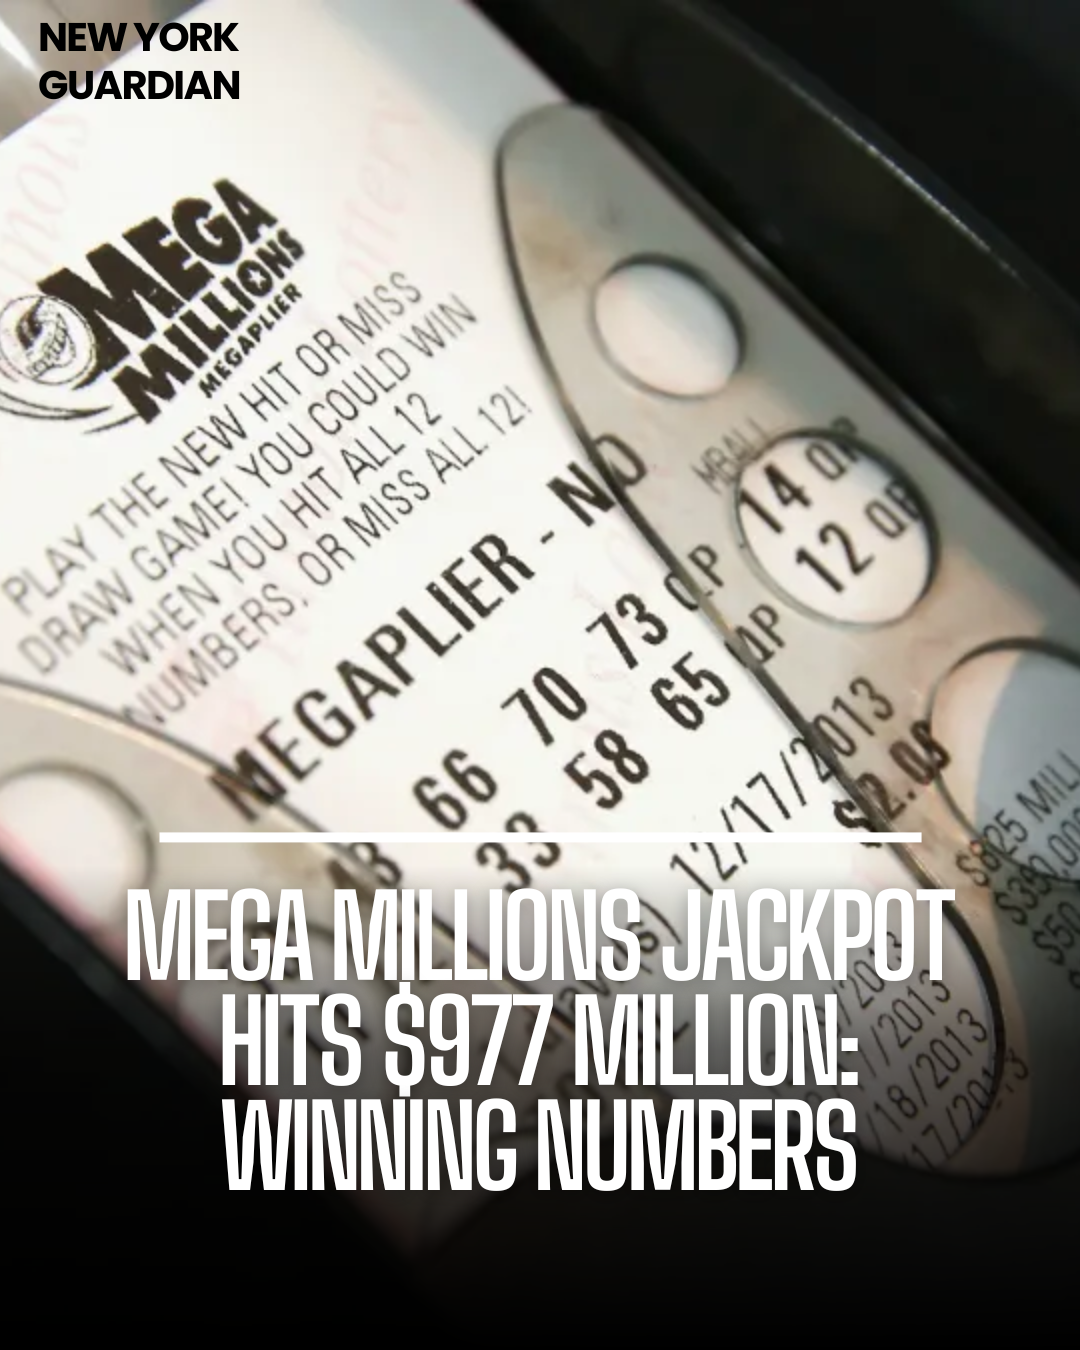 The much-anticipated drawing for Friday's Mega Millions jackpot has taken place, sparking dreams of a life-changing fortune for winners.